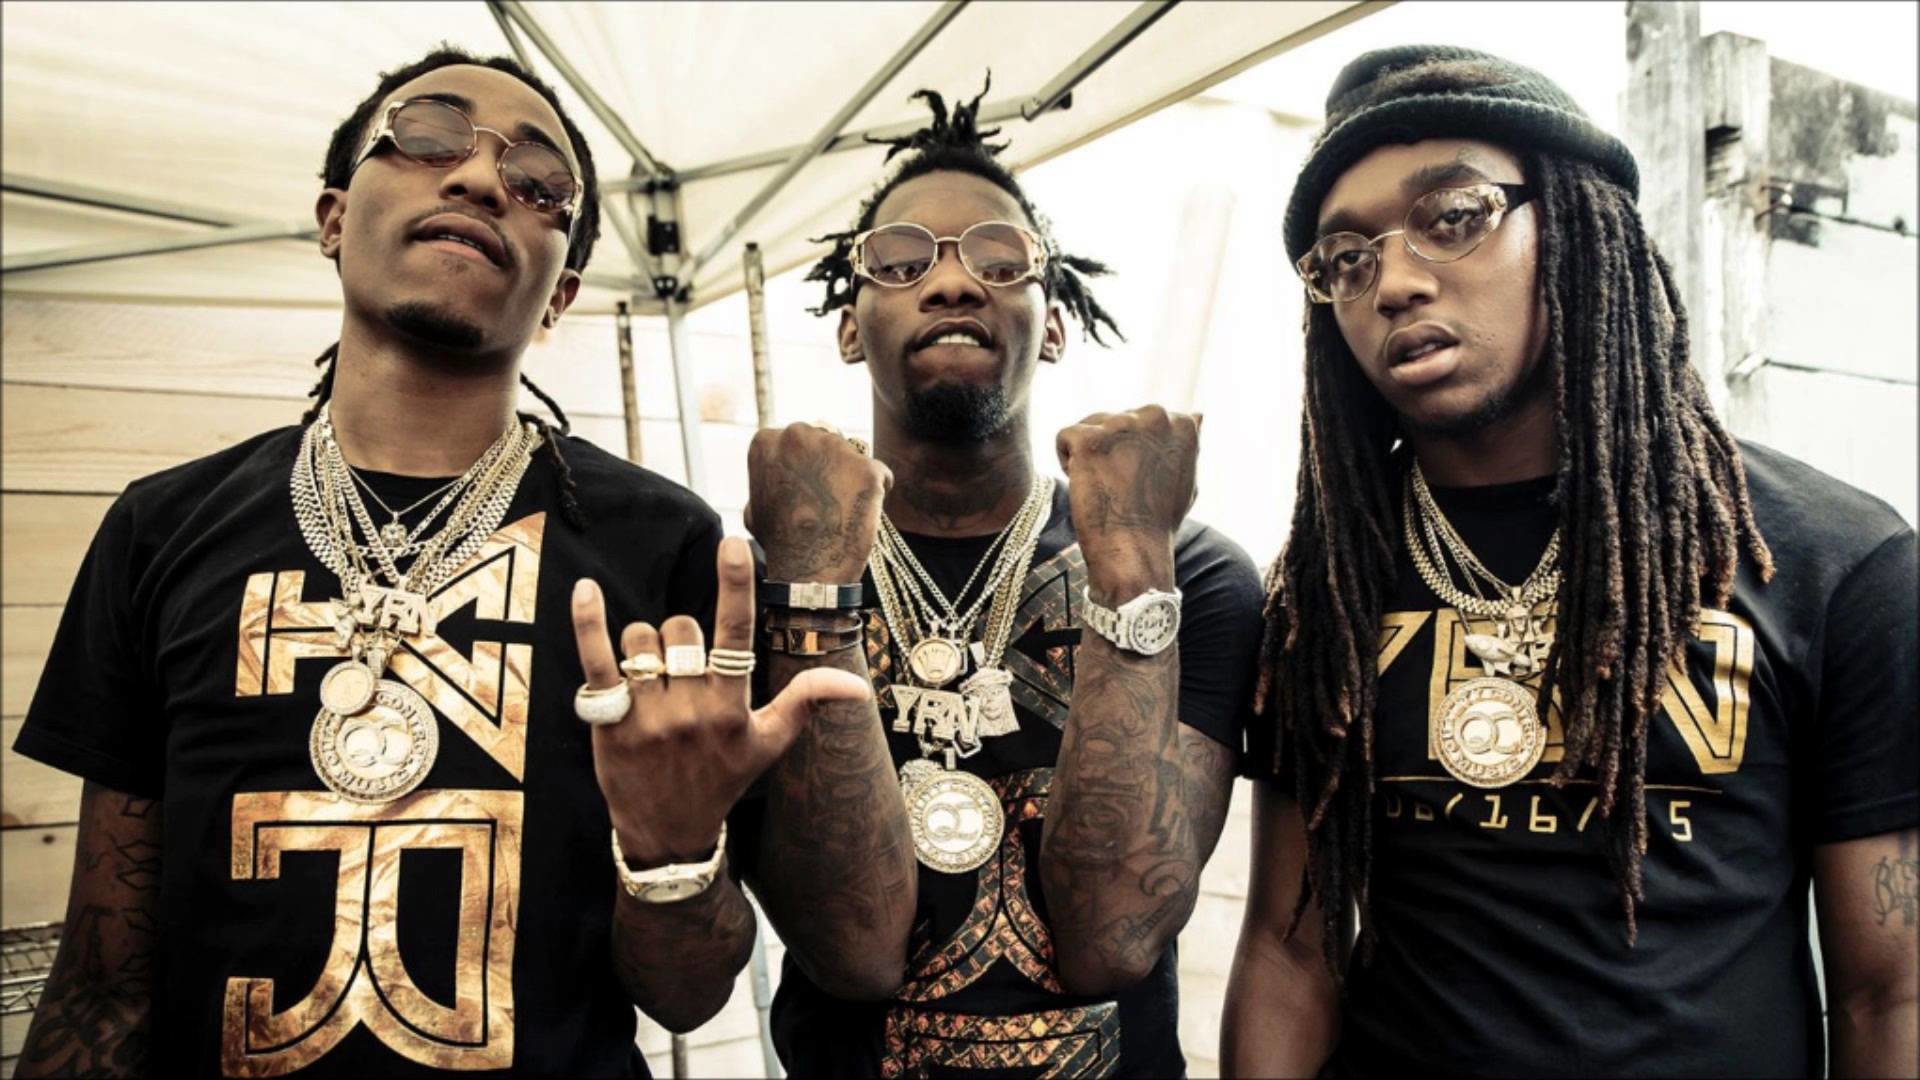 1920x1080 Migos Wallpapers - Wallpaper Cave | Free Wallpapers | Pinterest | Migos  wallpaper and Wallpaper